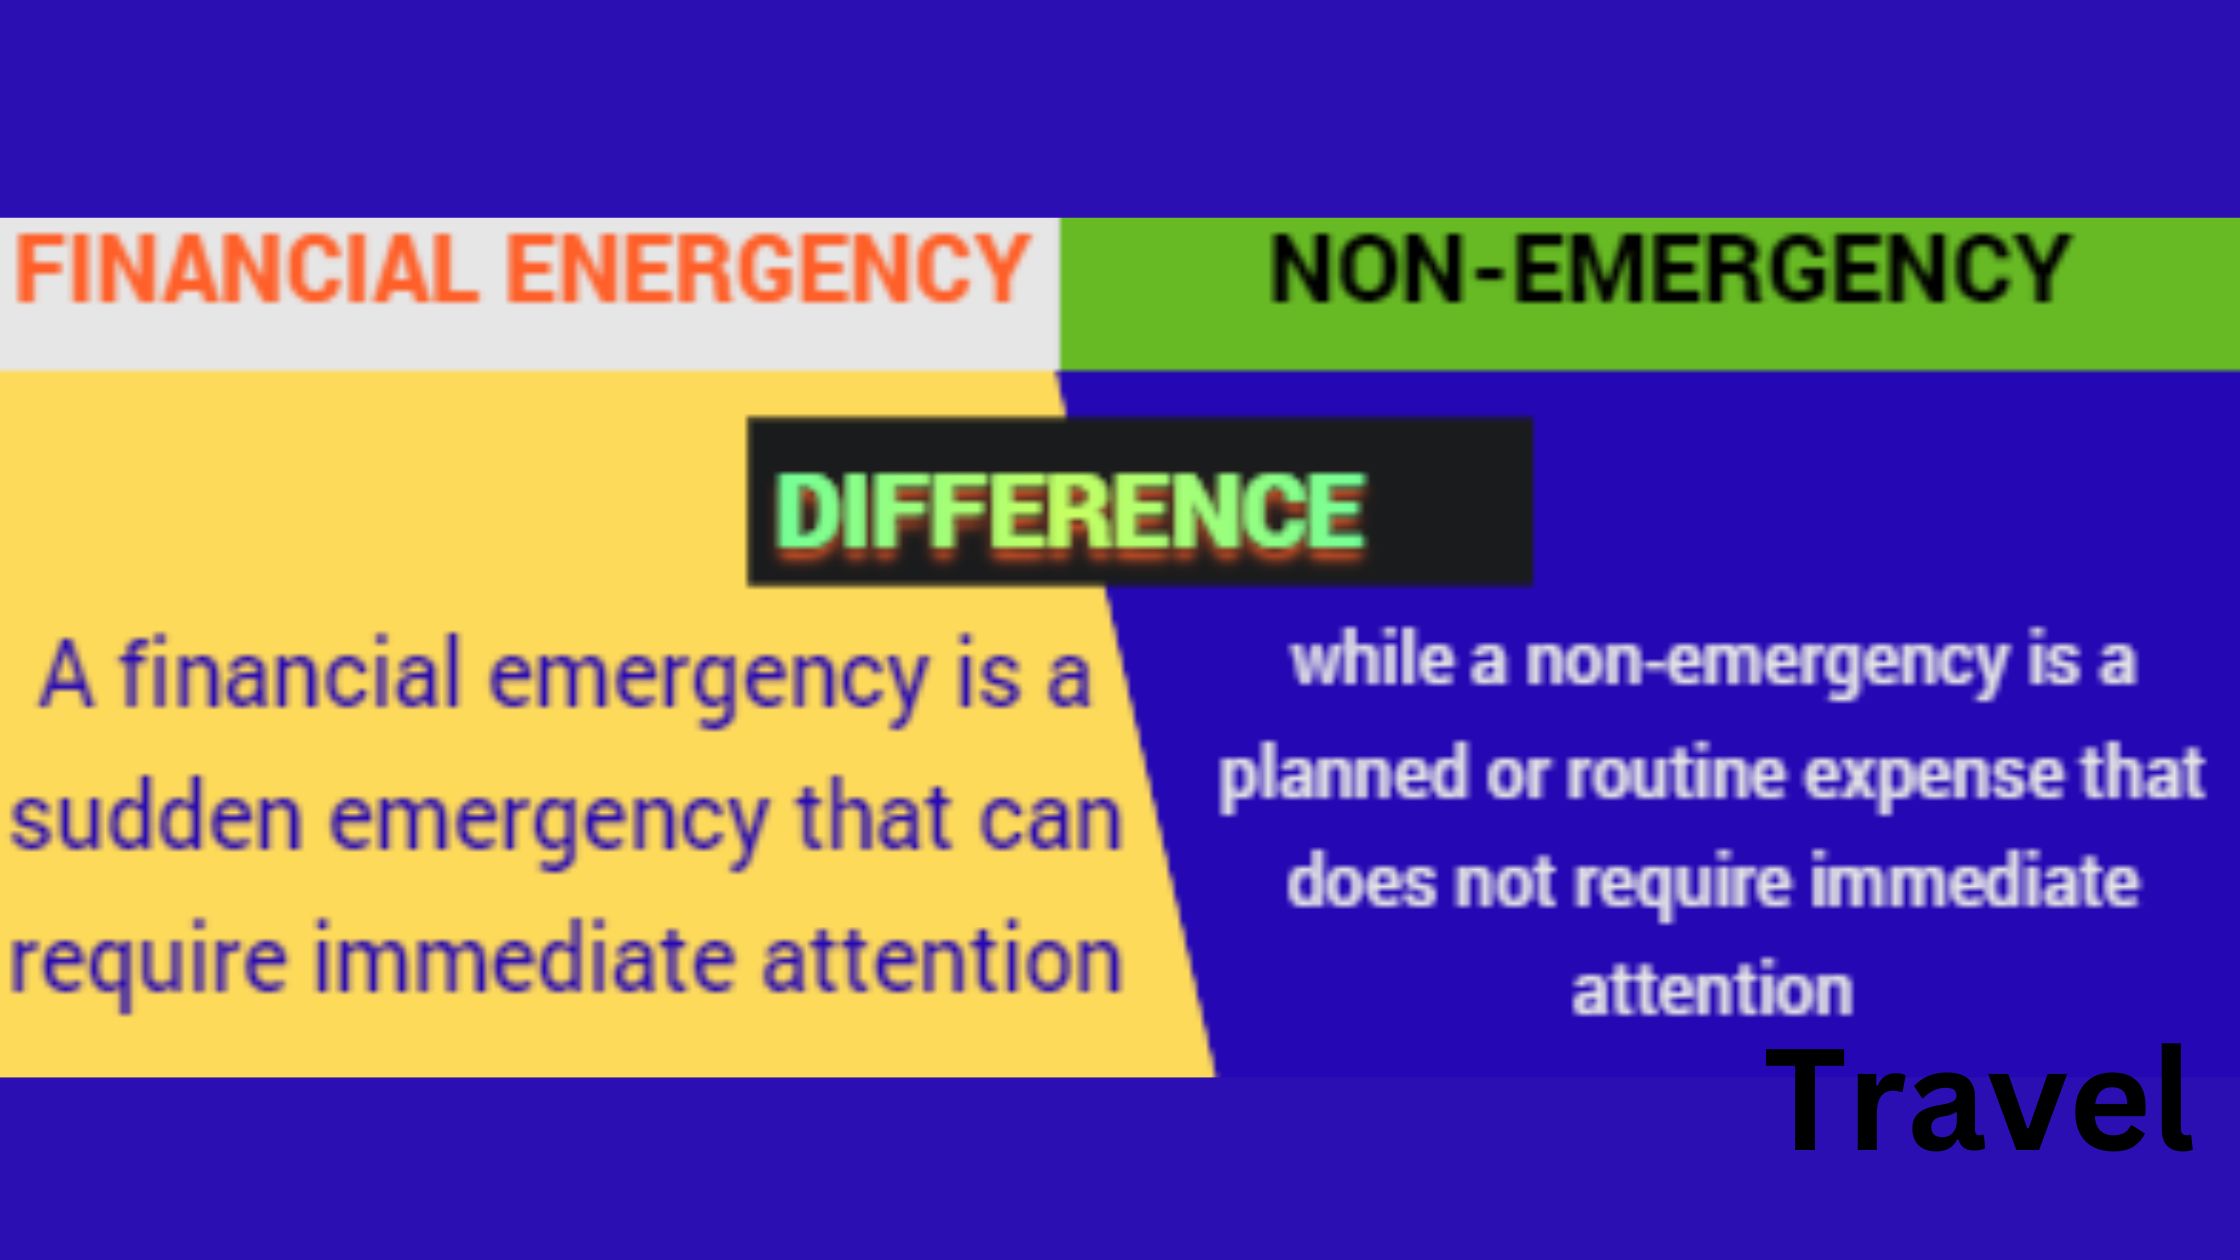 Contrast the Difference between a Financial Emergency And a Nonemergency